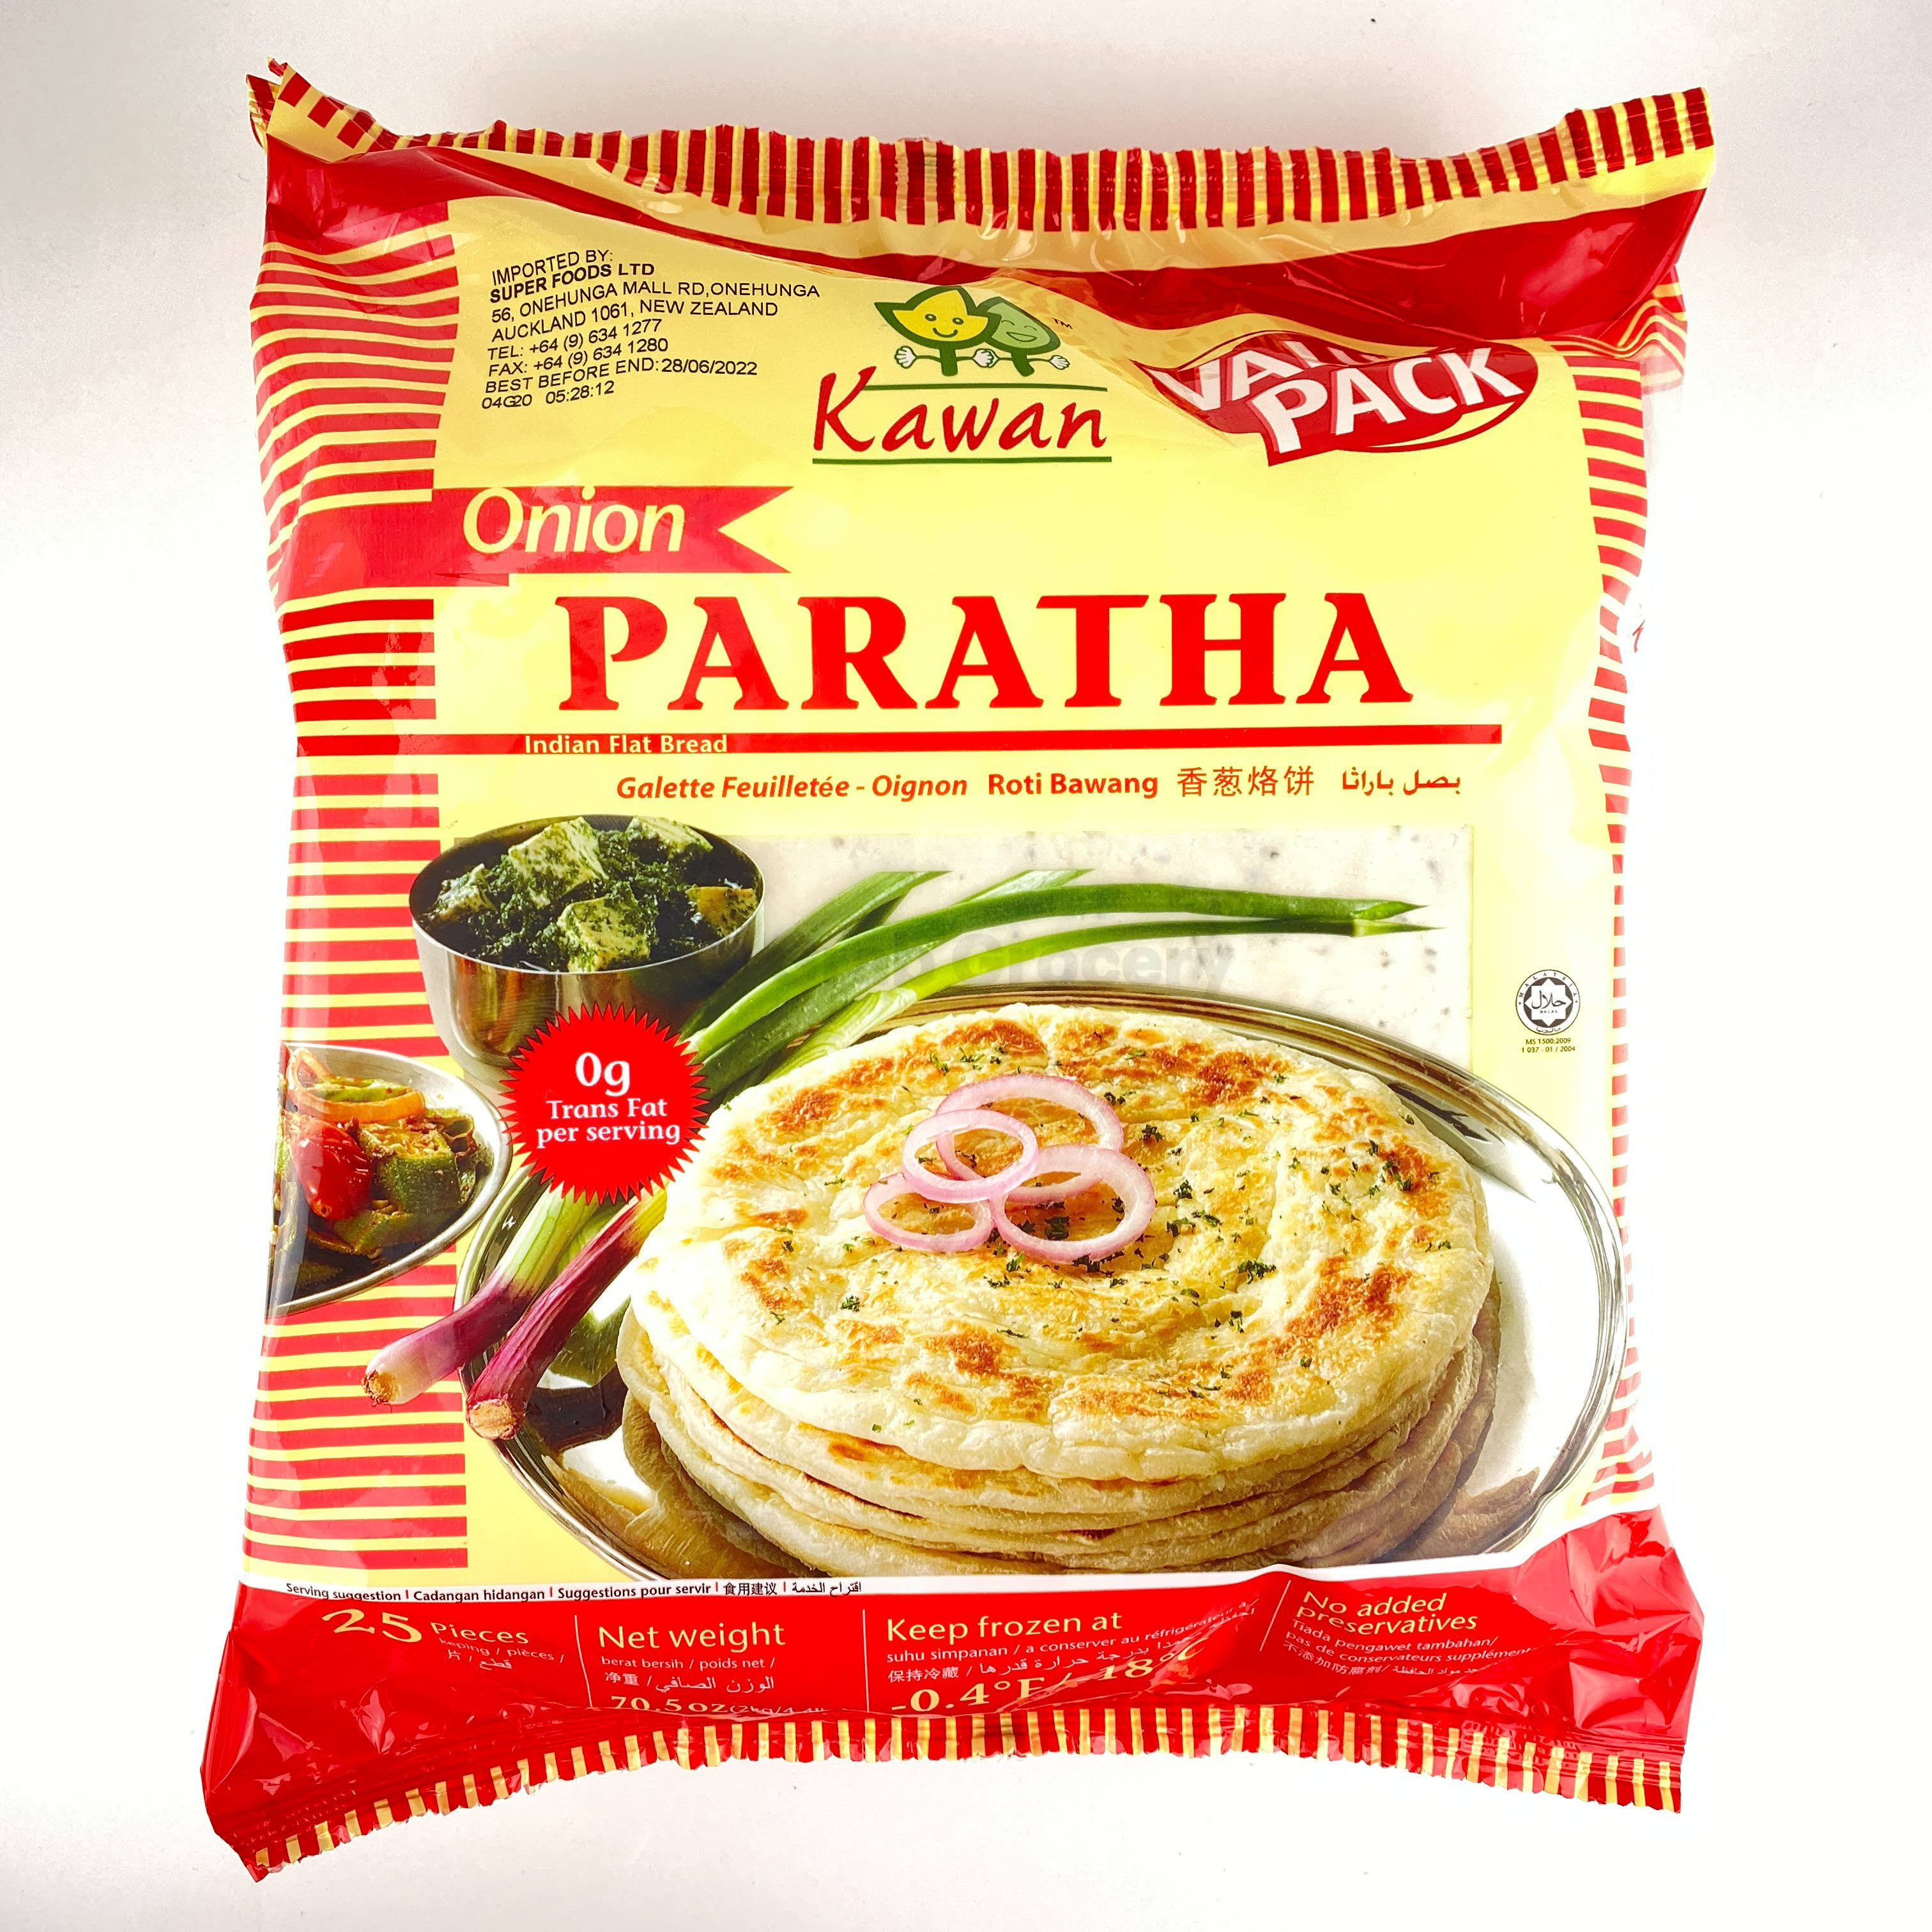 Kawan Onion Paratha - 25 Pieces - Indian Bazaar - Delivered by Mercato